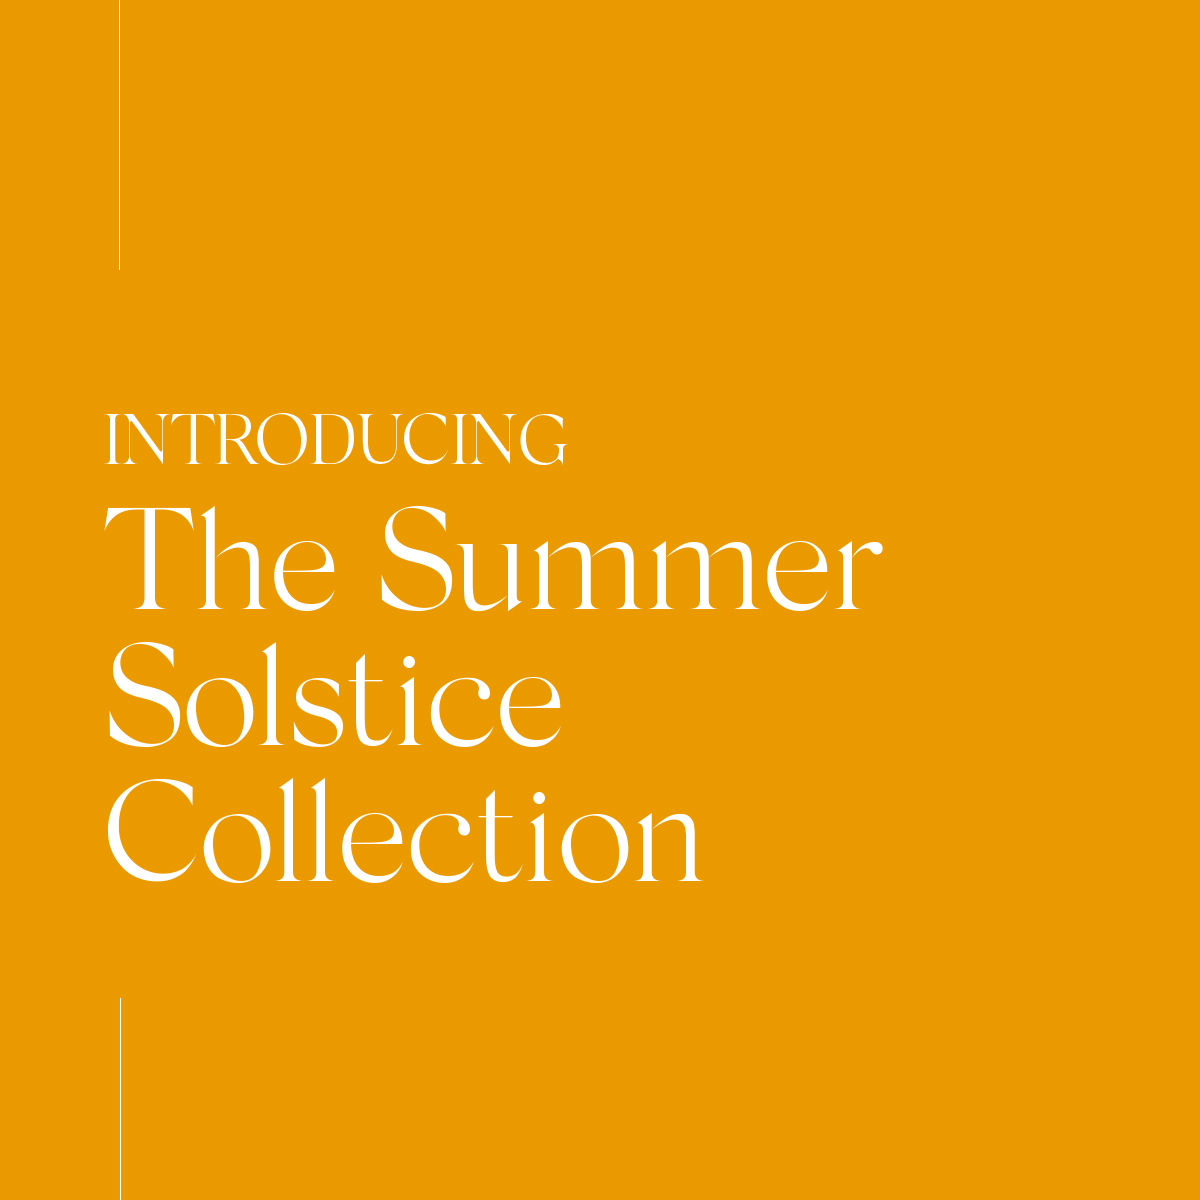 Introducing the Summer Solstice Collection in white type on yellow background